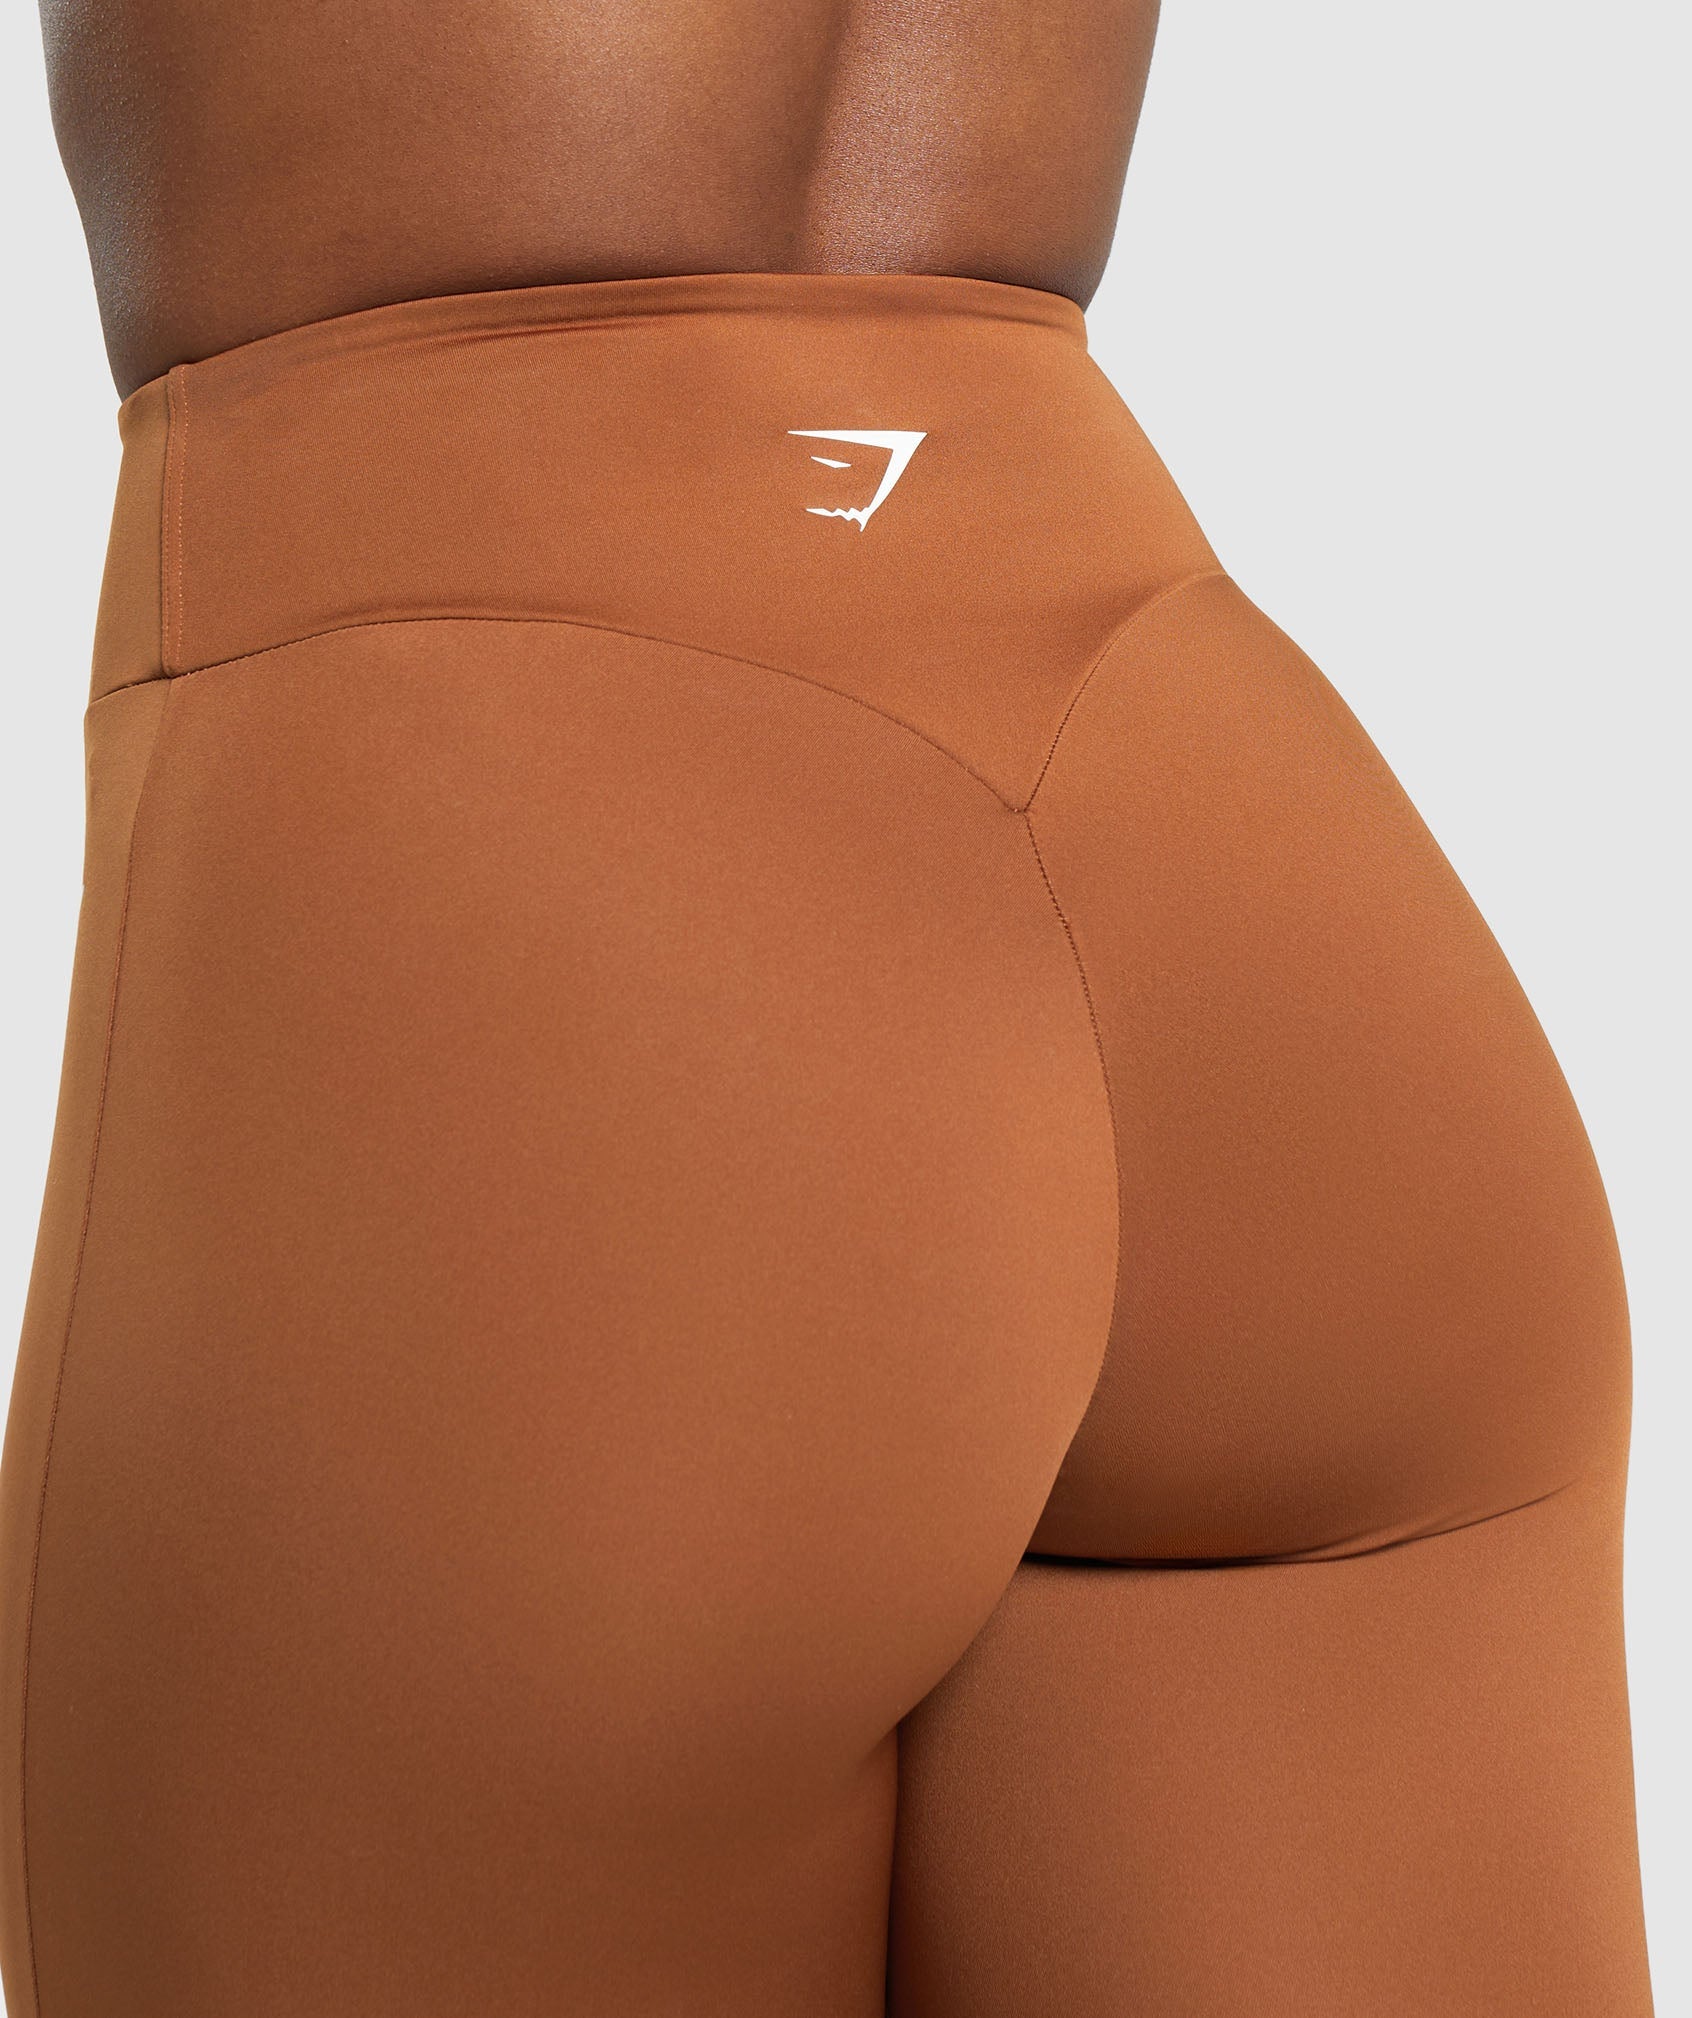 GS Power Tall Leggings in Copper Brown - view 5